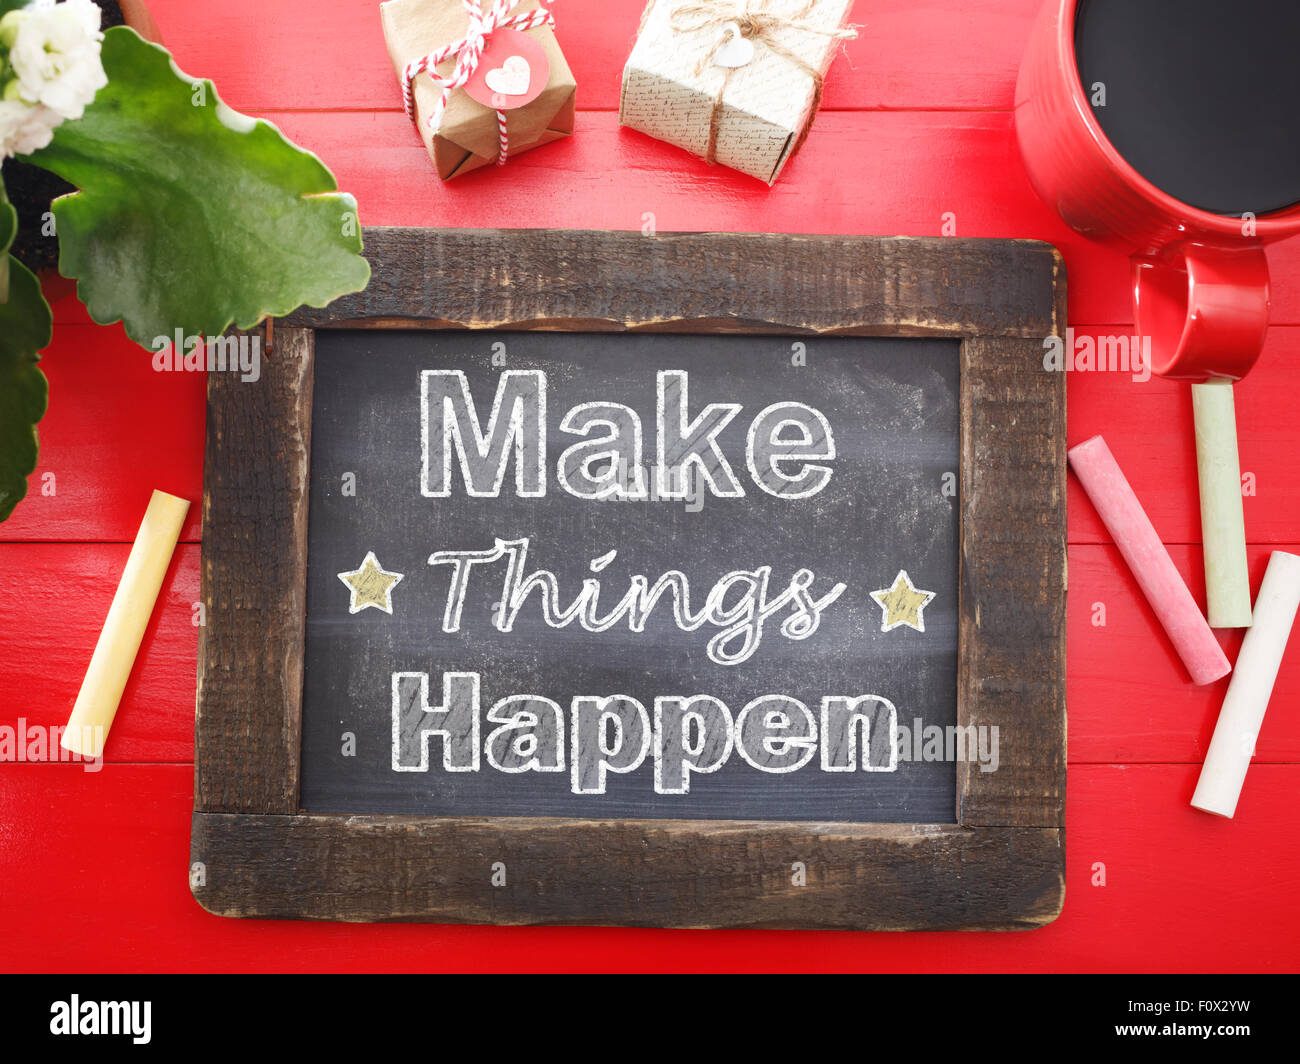 Make Things Happen message written on a vintage chalkboard on a red table Stock Photo